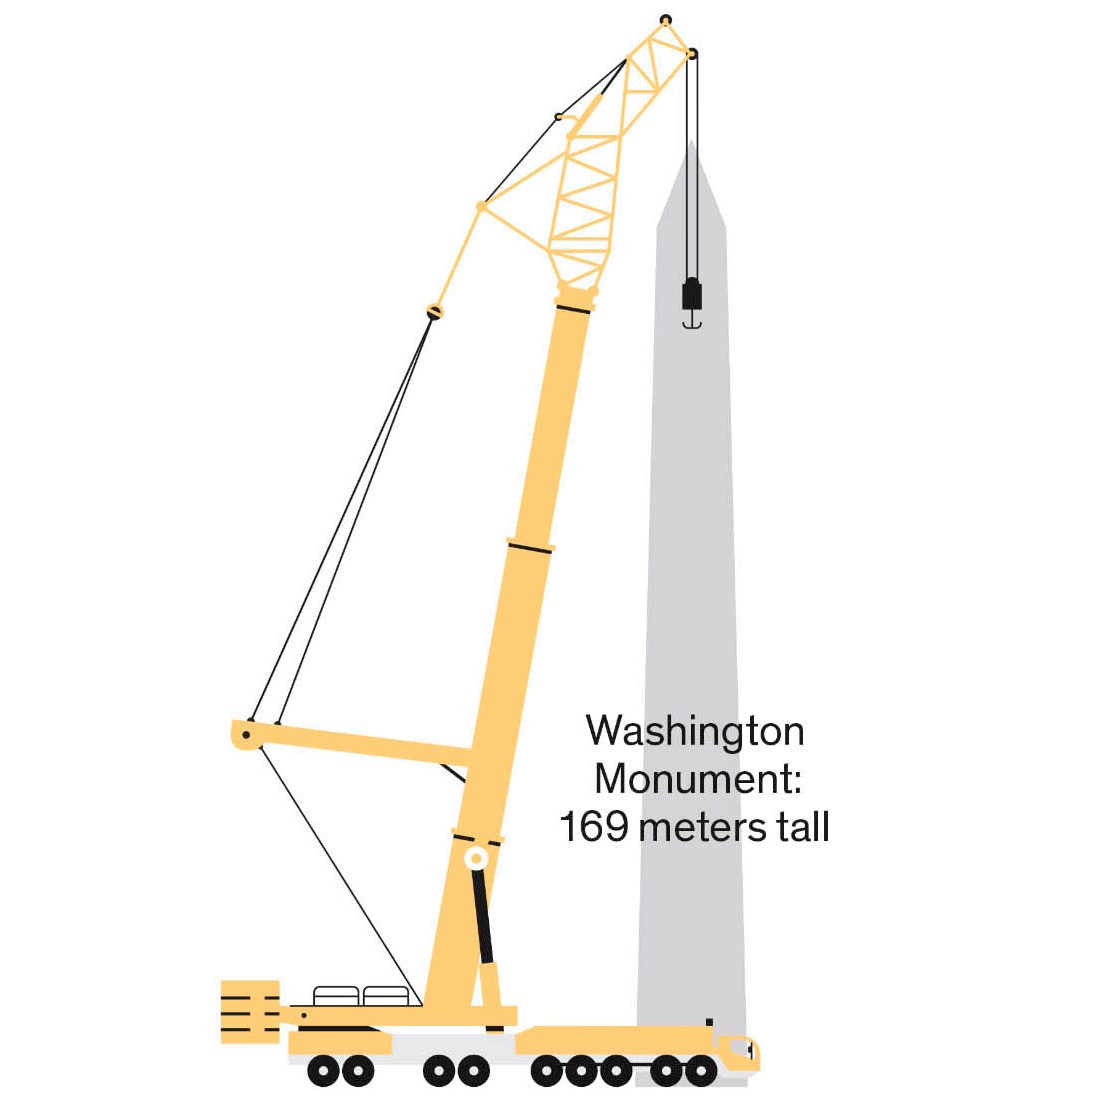 The world's most powerful mobile crane was built in 2014 to help repair the 169-meter-tall Washington Monument